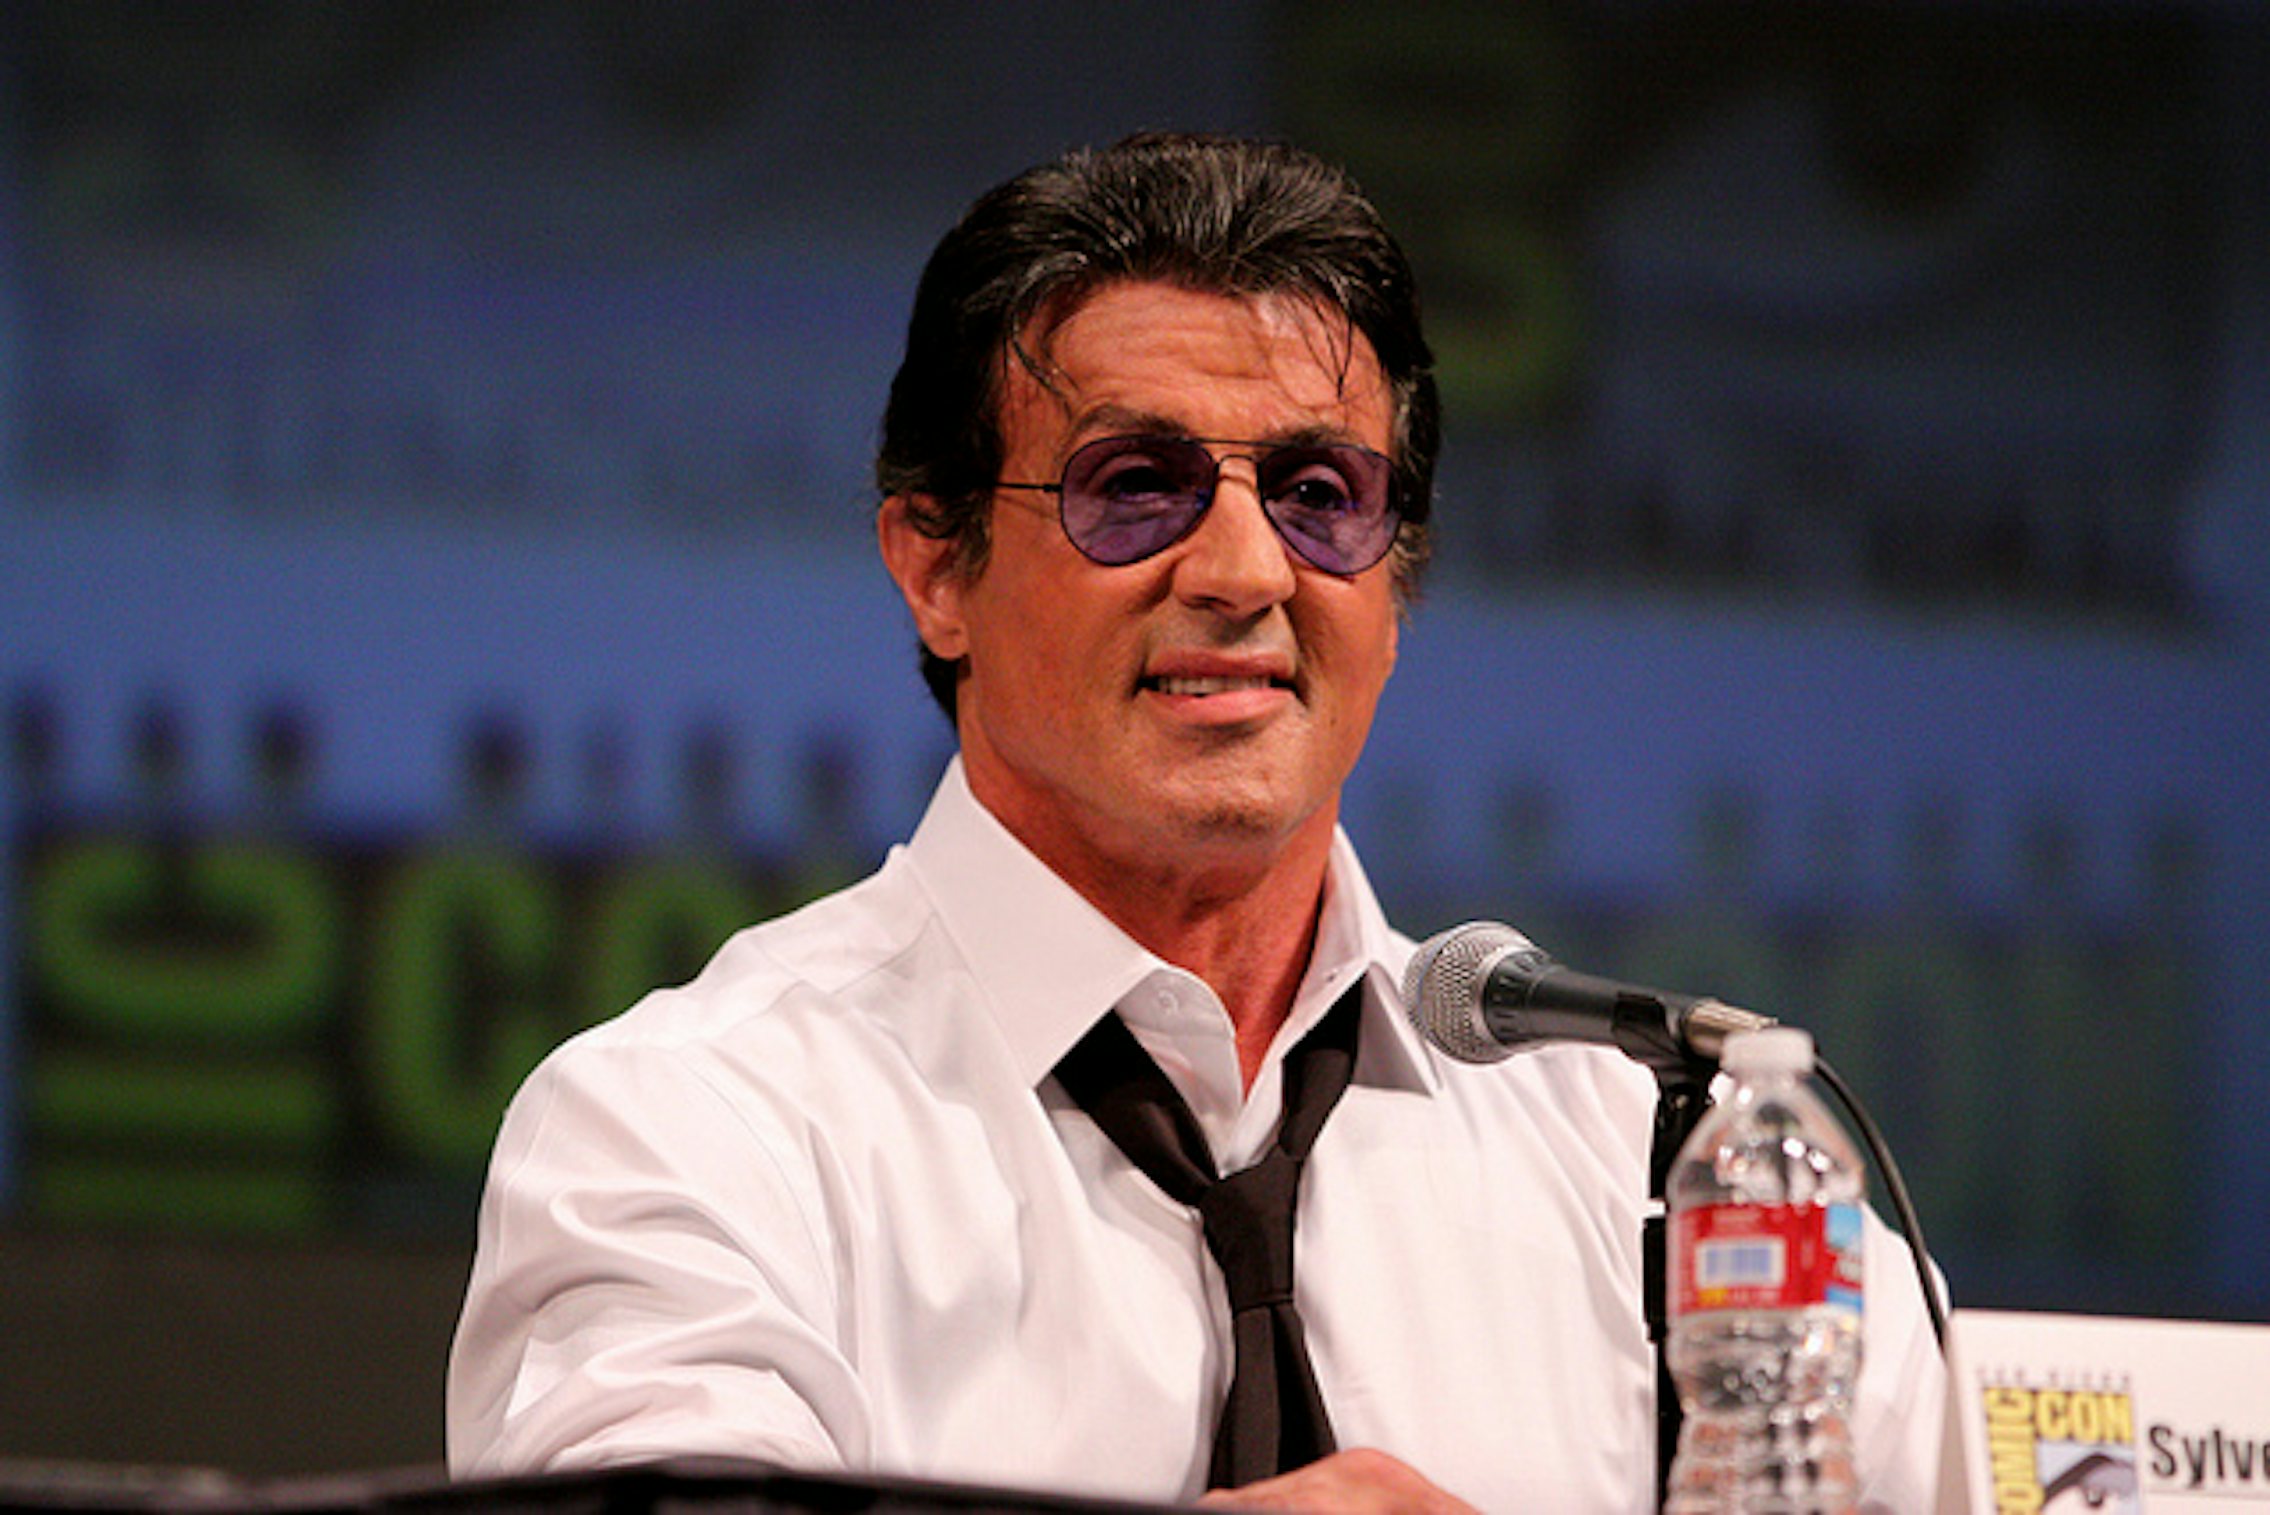 Sylvester Stallone says a new 'Rambo' movie is coming